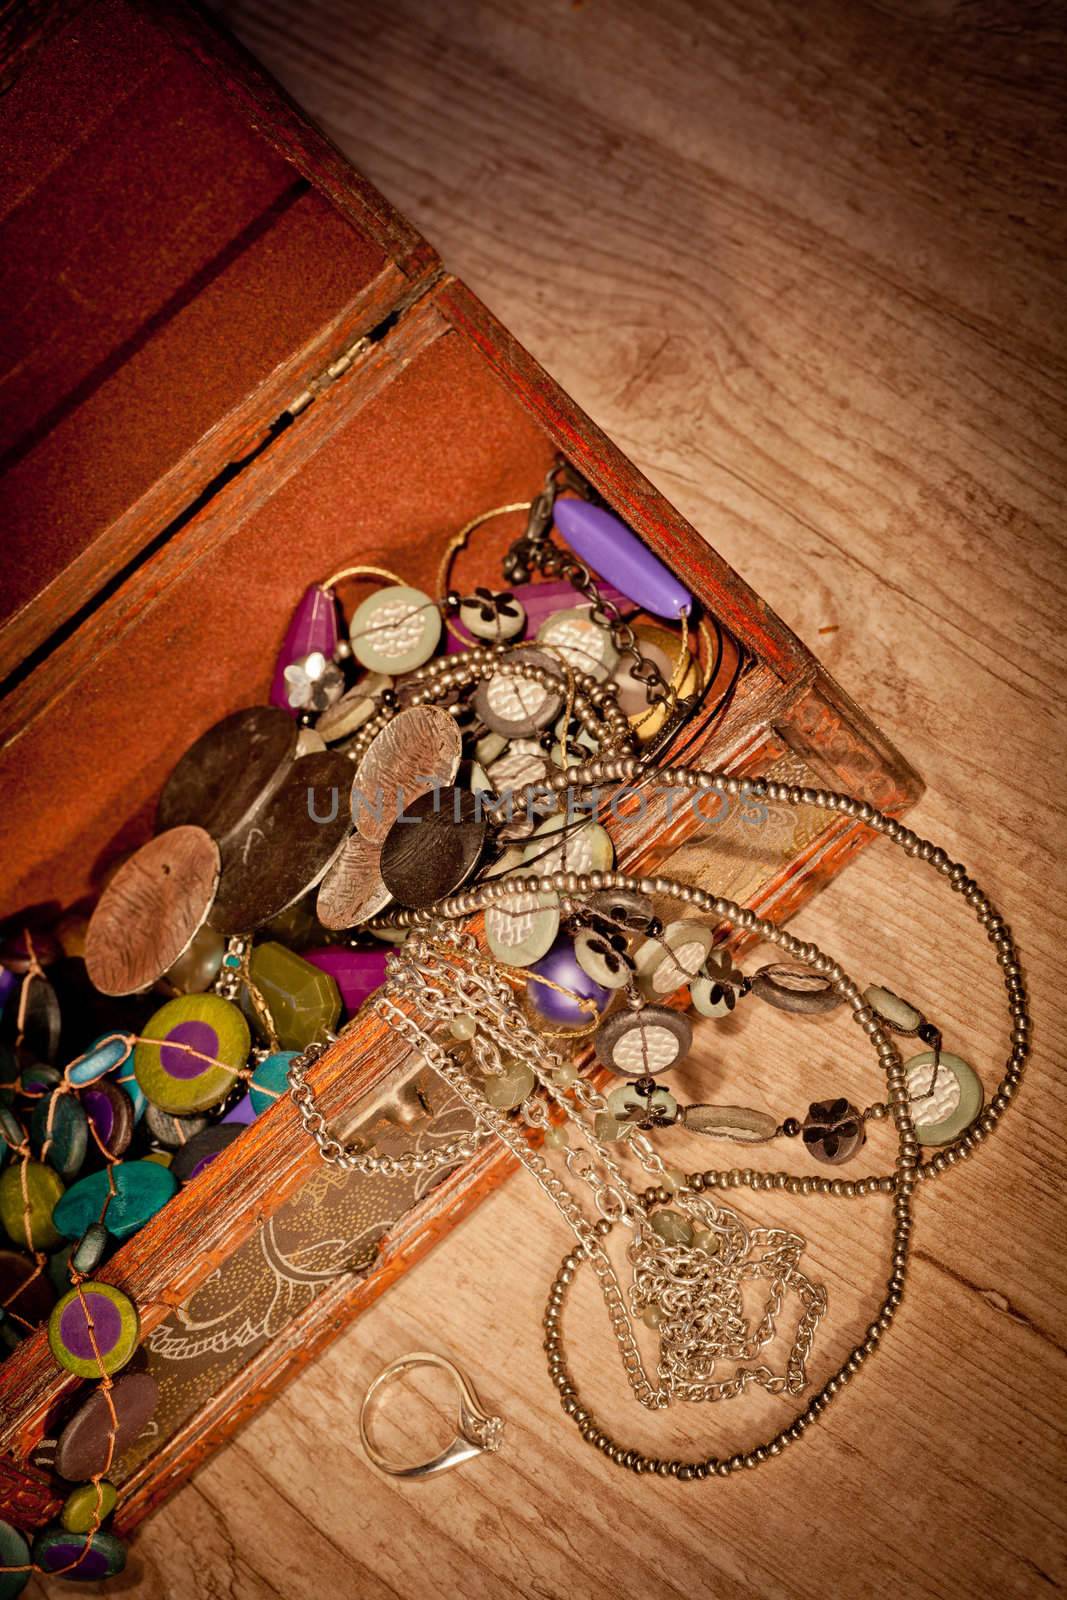 Vintage treasure chest with some jewels inside